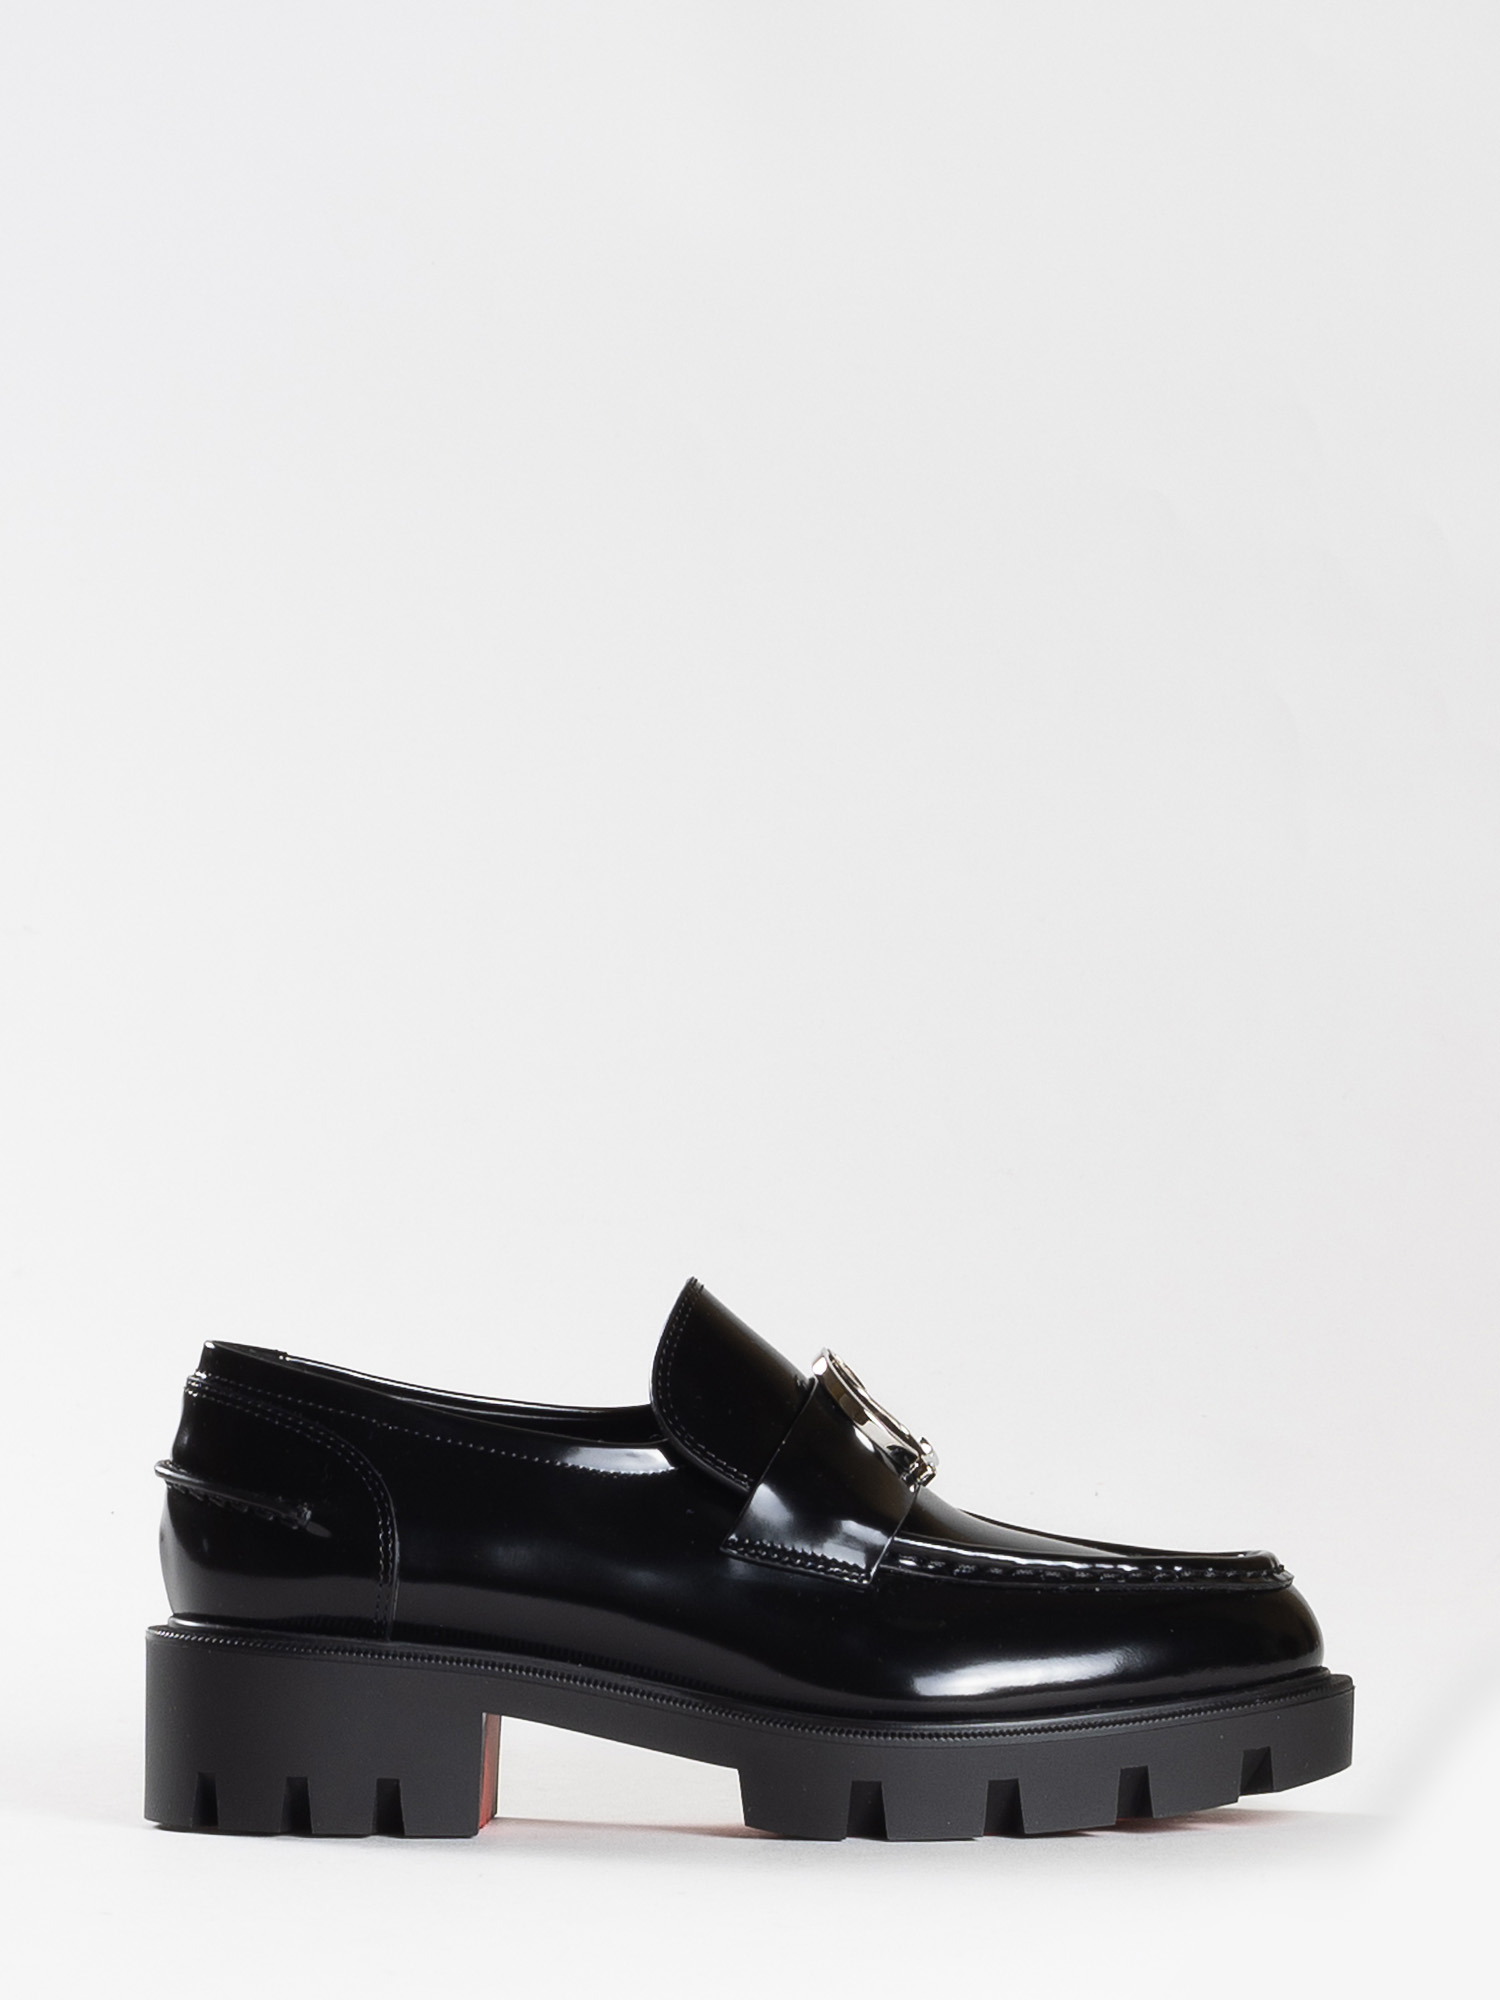 LEATHER LOAFERS - CHRISTIAN LOUBOUTIN